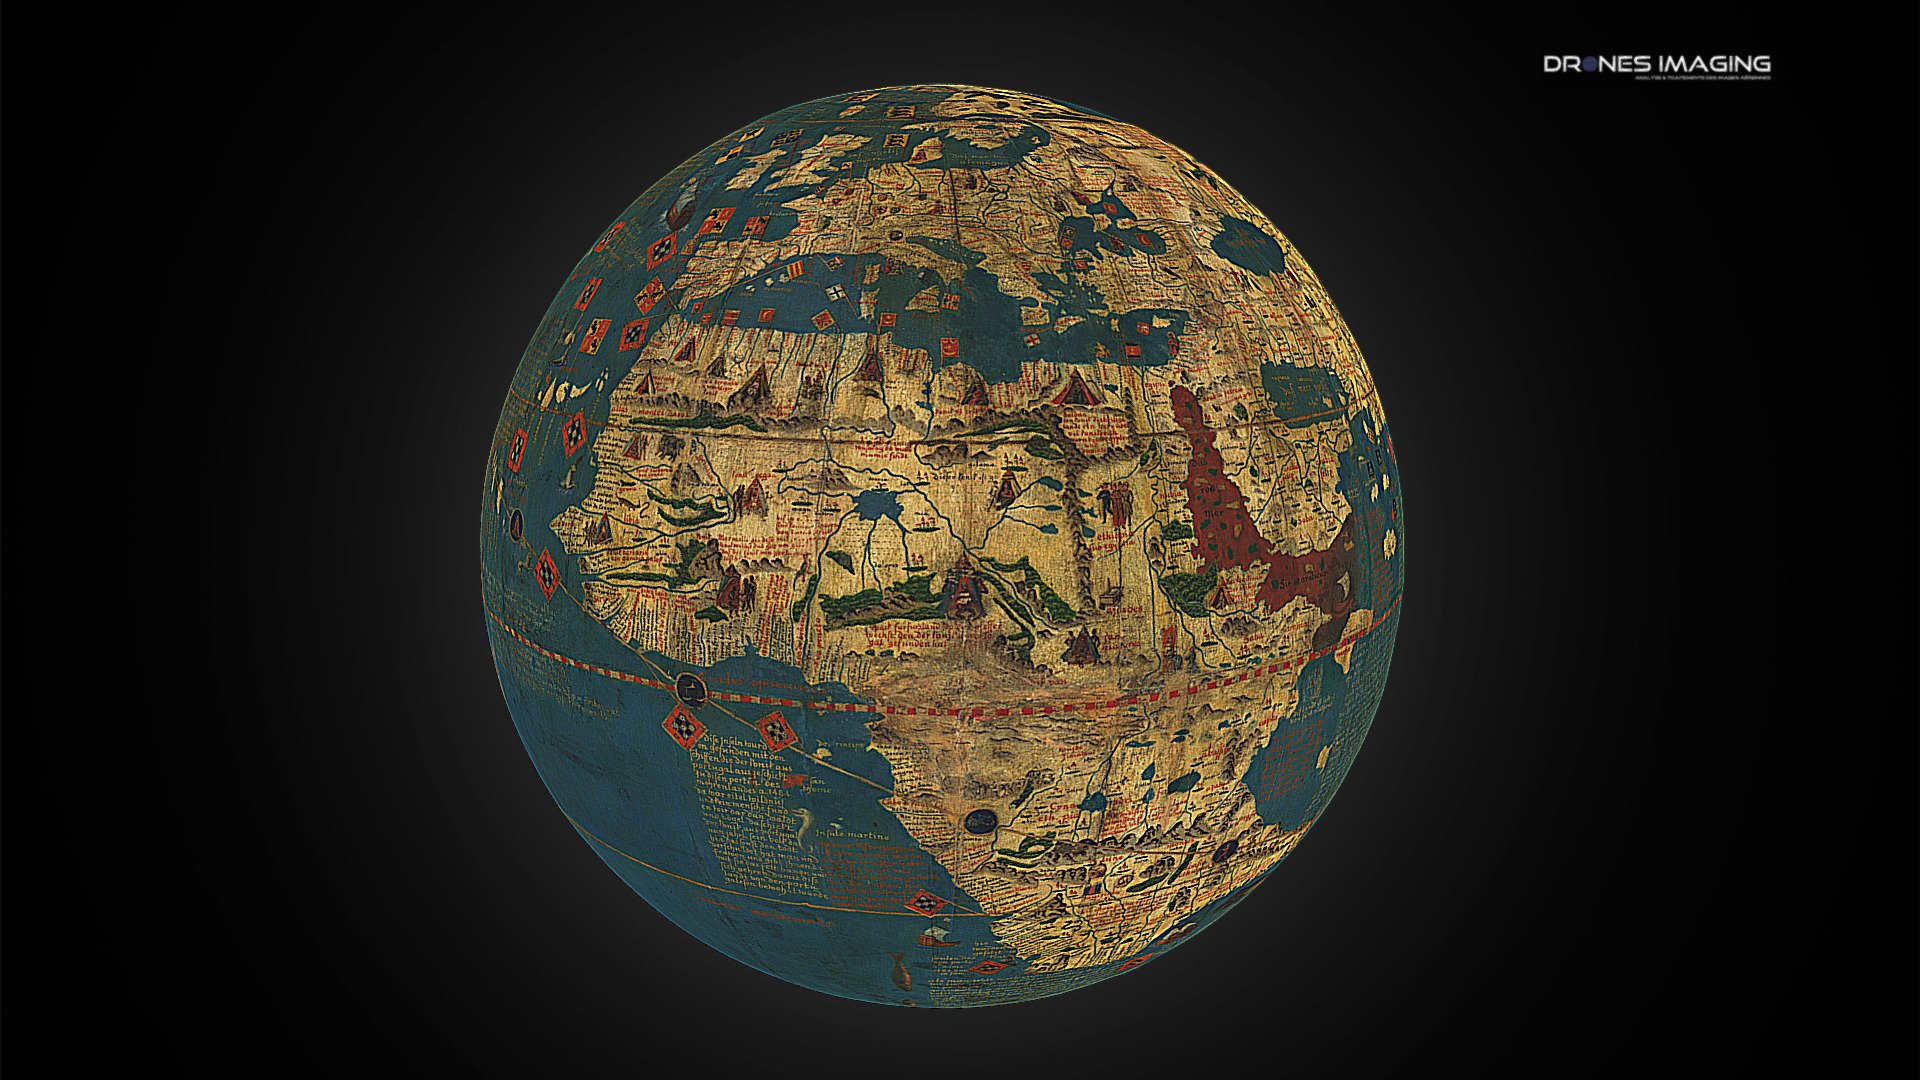 Made in 1492, the globe of Martin Behaim, German trader and cartographer, is the oldest known terrestrial globe.
It reflects the worldview of Europeans at the end of the Middle Ages, before the discovery of America.

Data processing by dronesimaging.com
and Agisoft Metashape https://www.dronesimaging.com/agisoft-metashape/ - First terrestrial globe - Martin Behaim 1492 - 3D model by Drones Imaging (@dronesimaging) 3d model